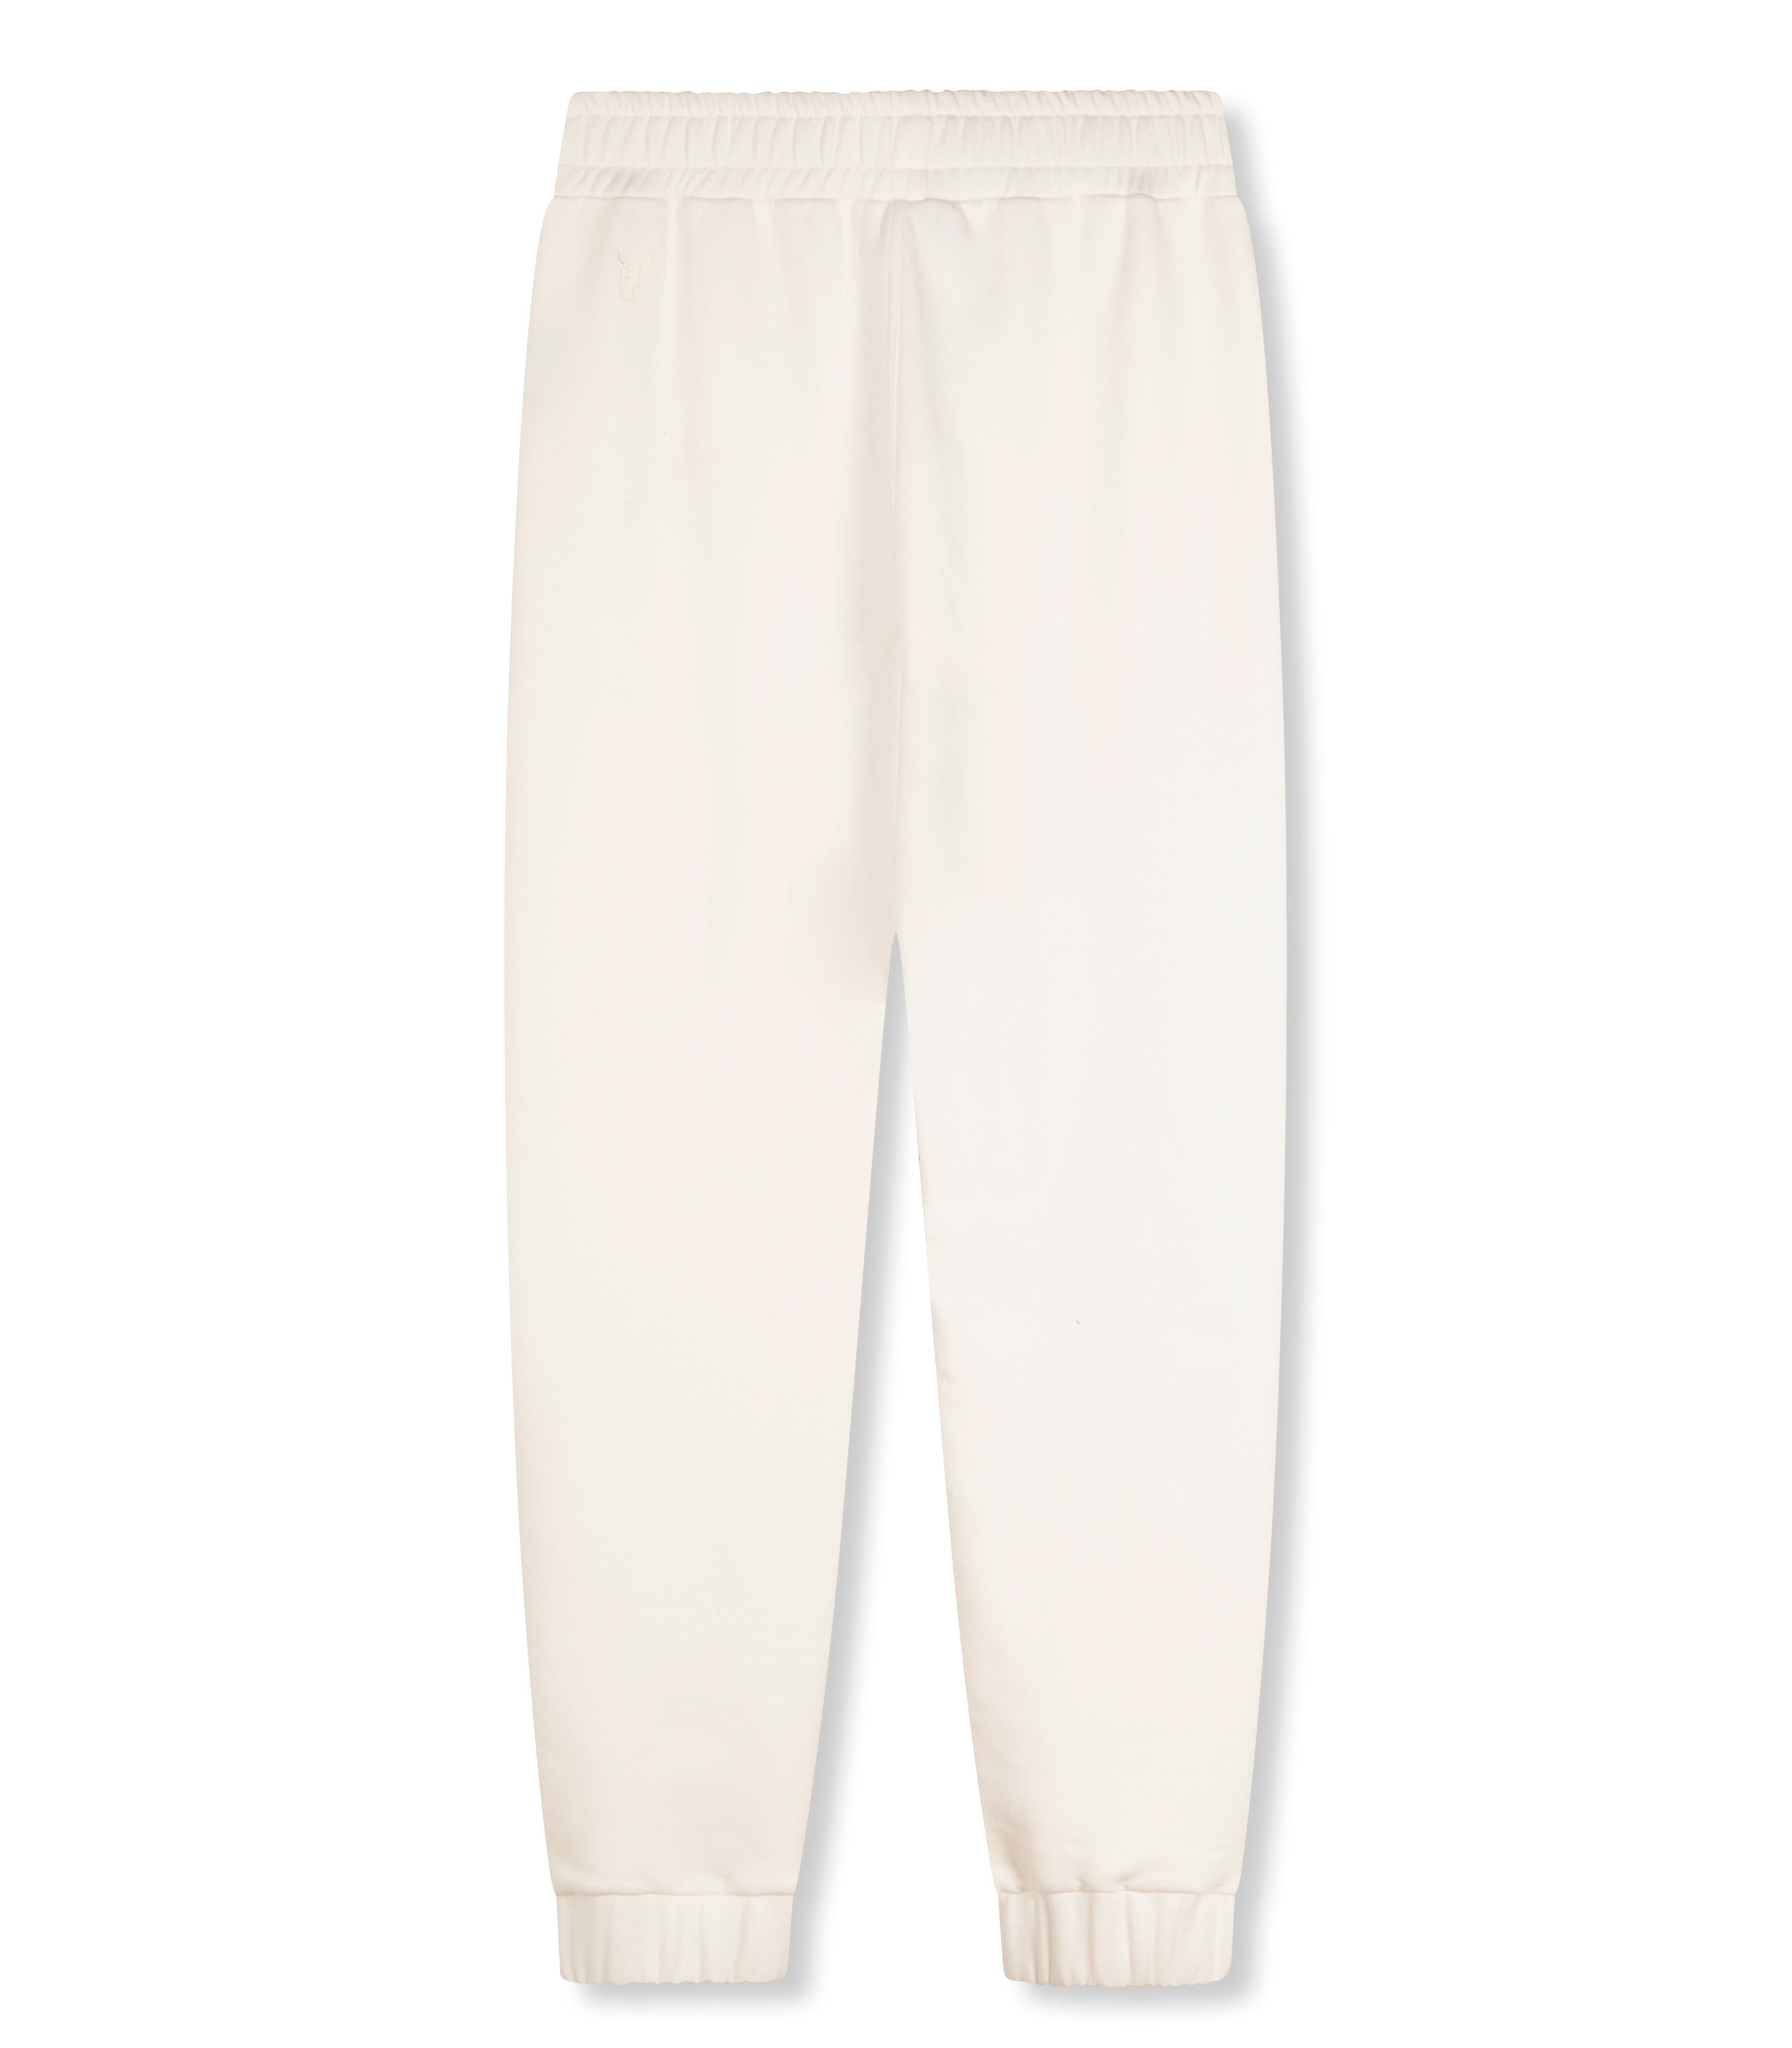 Embroidered sweat pants - soft white